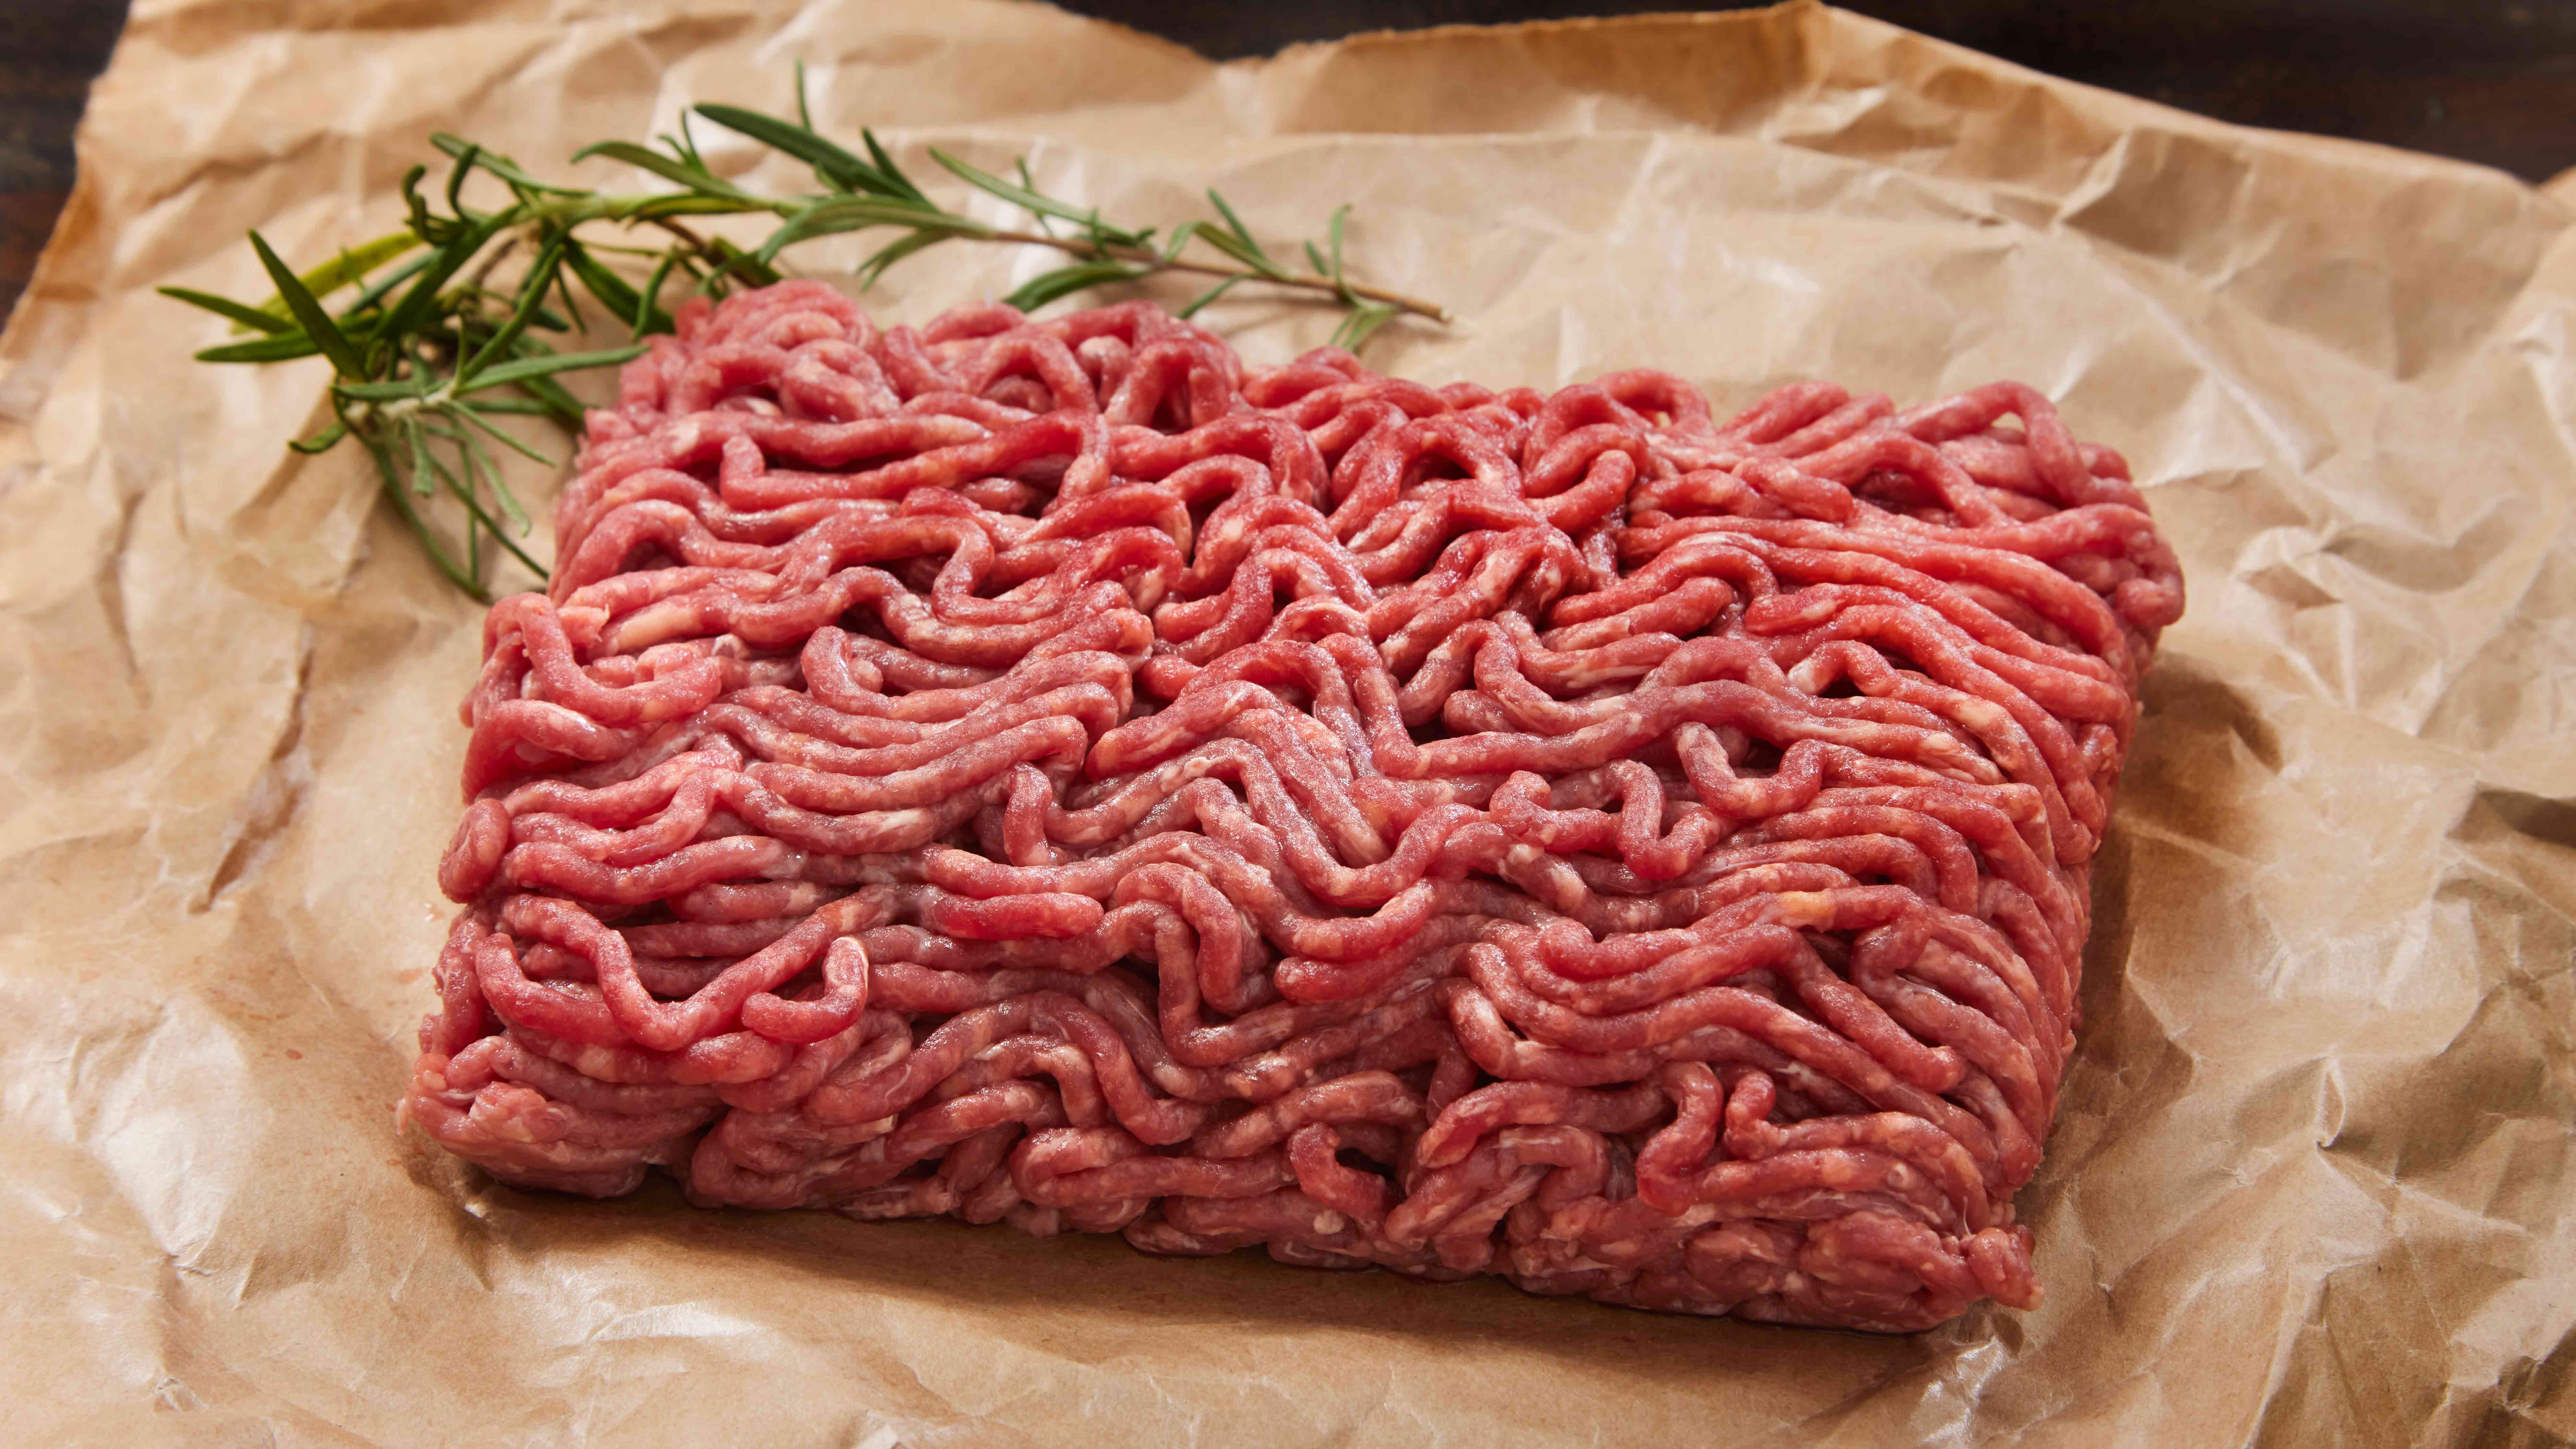 More than 58,000 pounds of ground beef recalled over possible E. coli – NBC  5 Dallas-Fort Worth